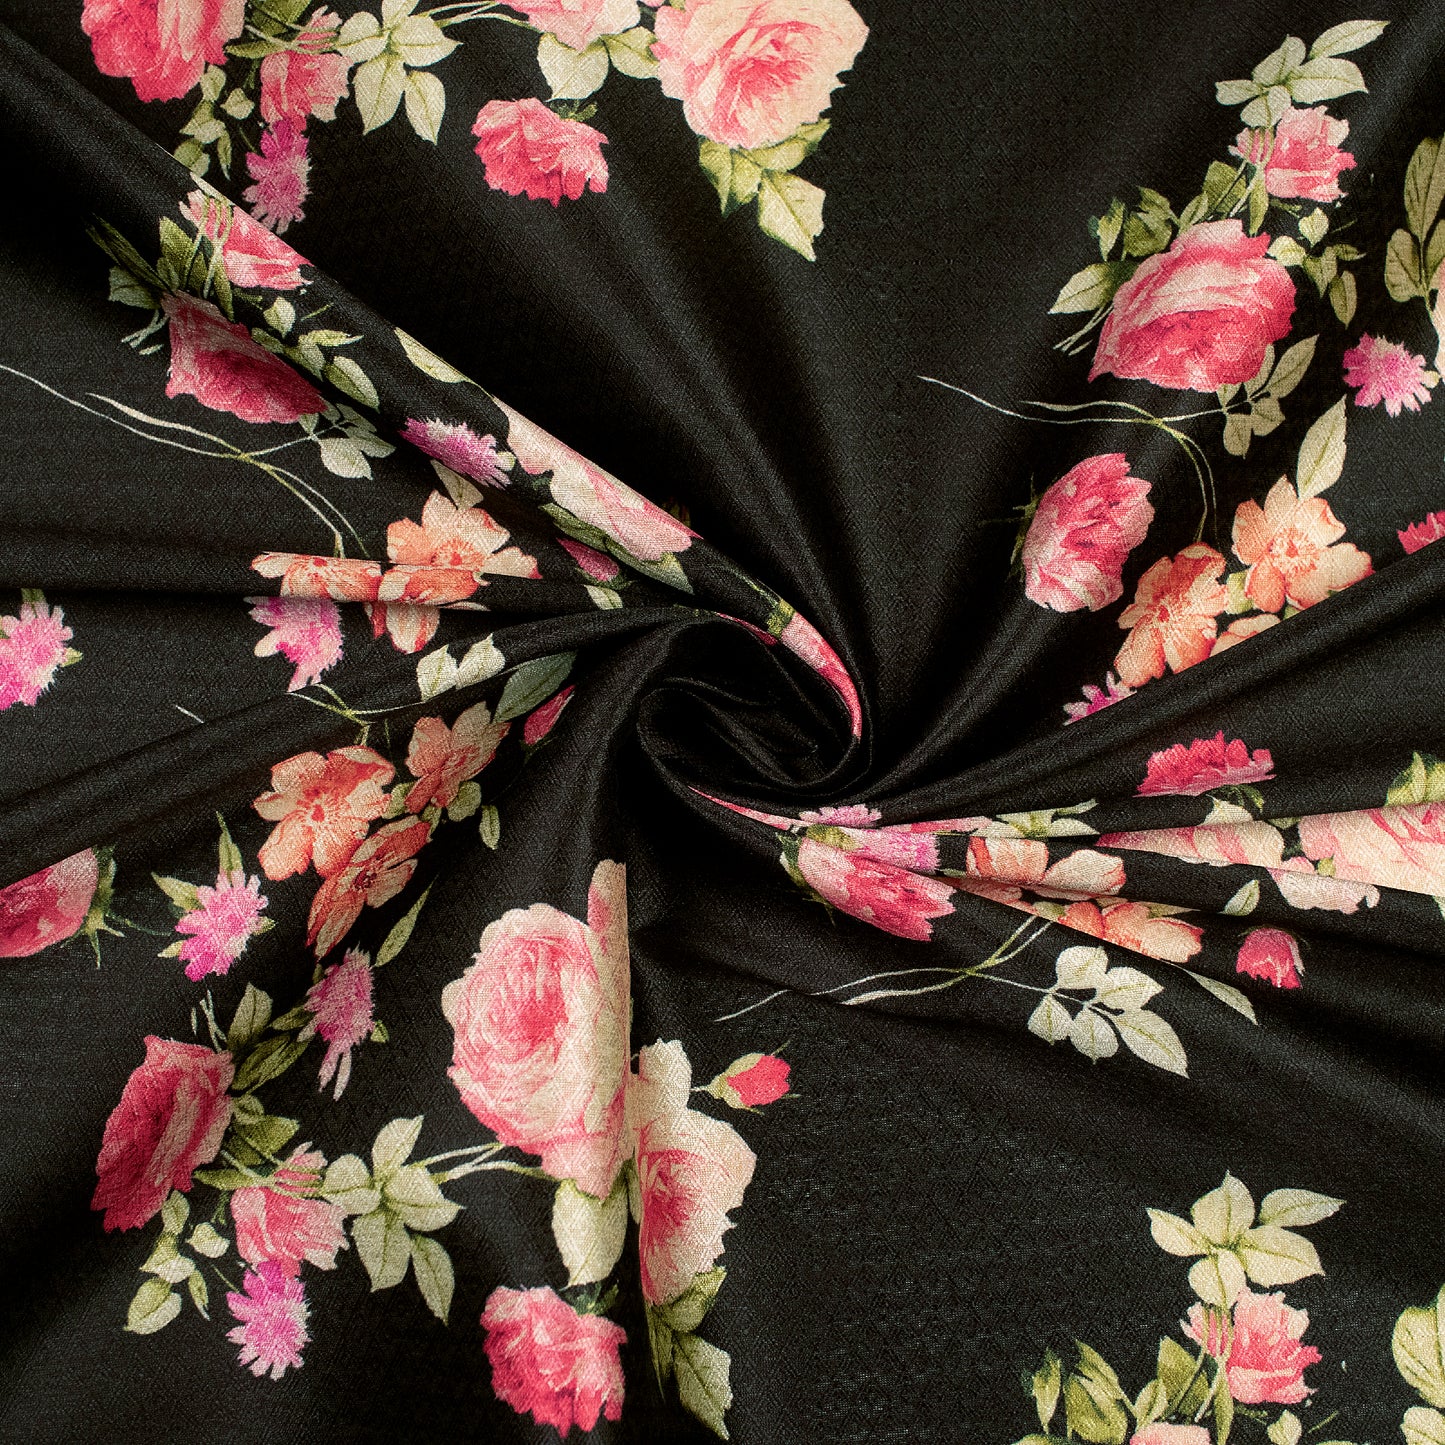 Black Floral Jacquard Booti Japan Satin Fabric (Width 56 Inches)